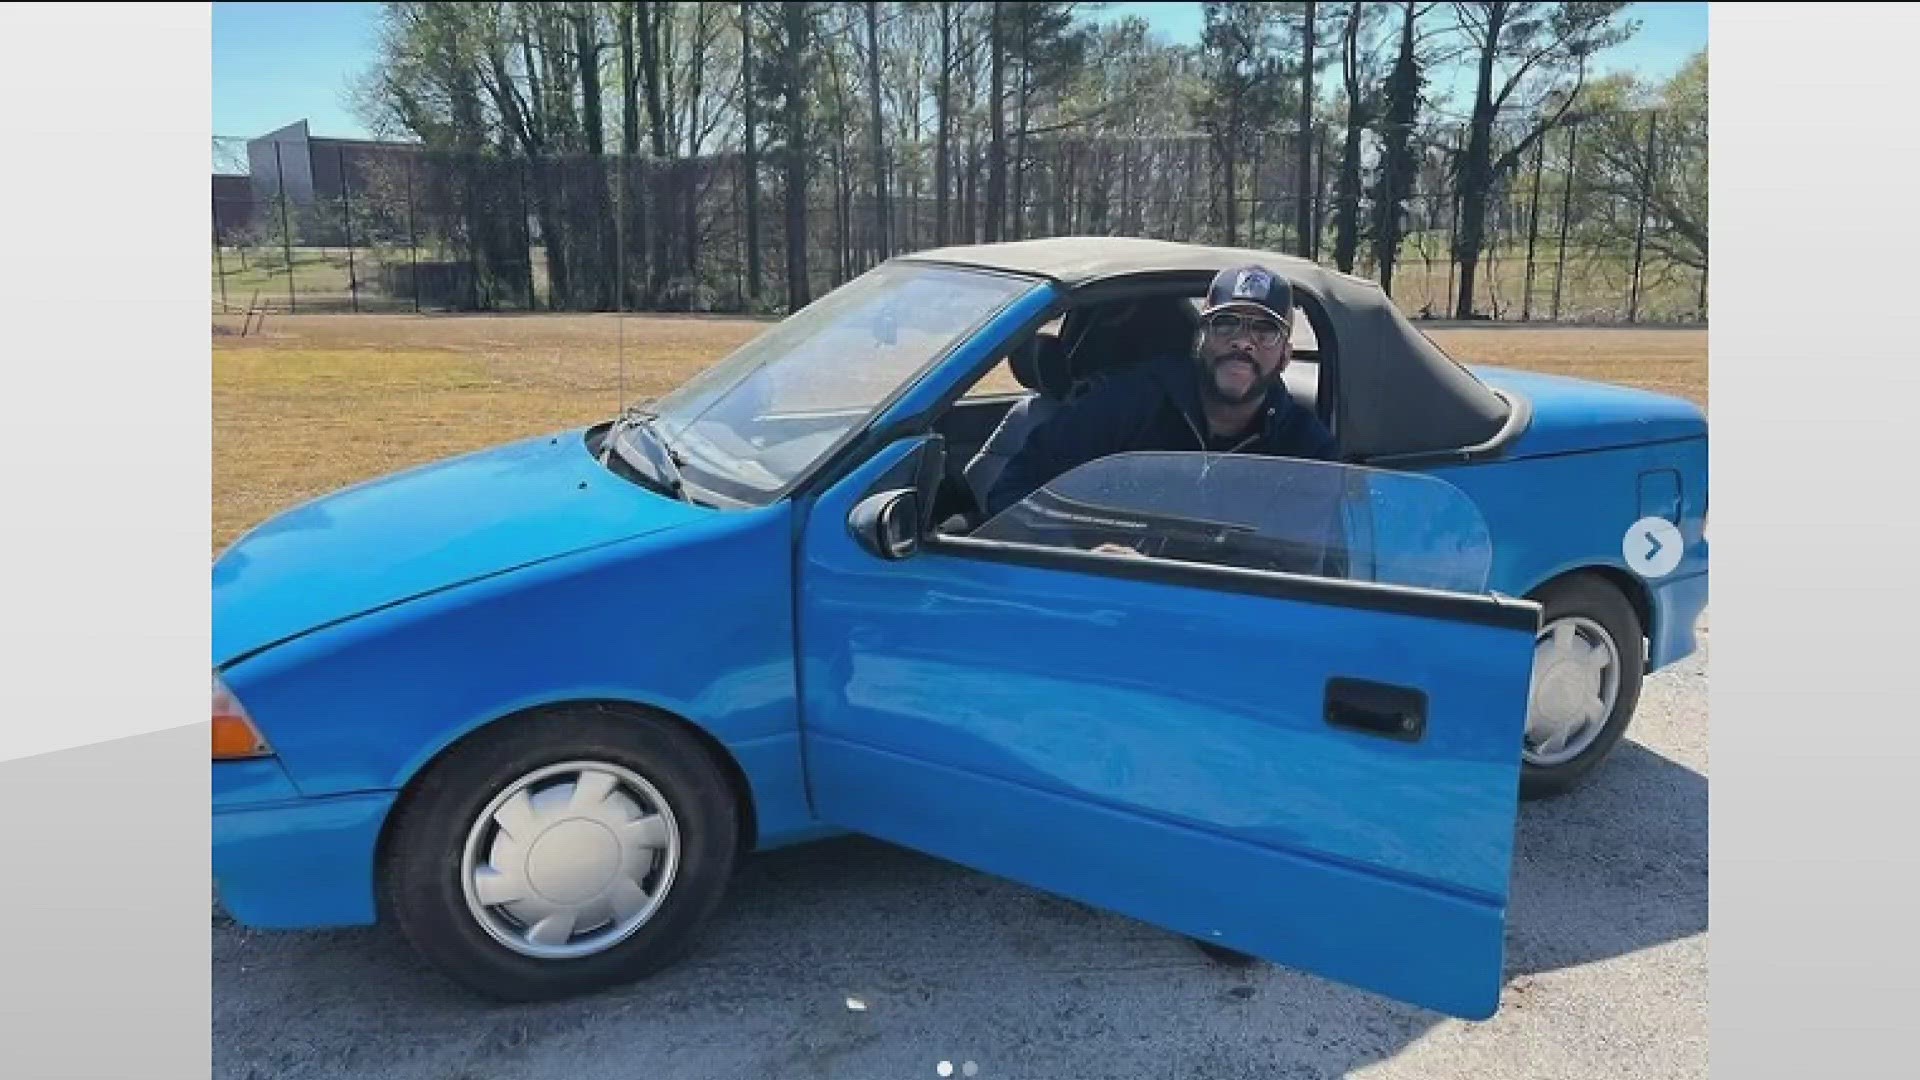 He posted a video on his Instagram of his Geo Metro, a car that holds a special significance to his life.